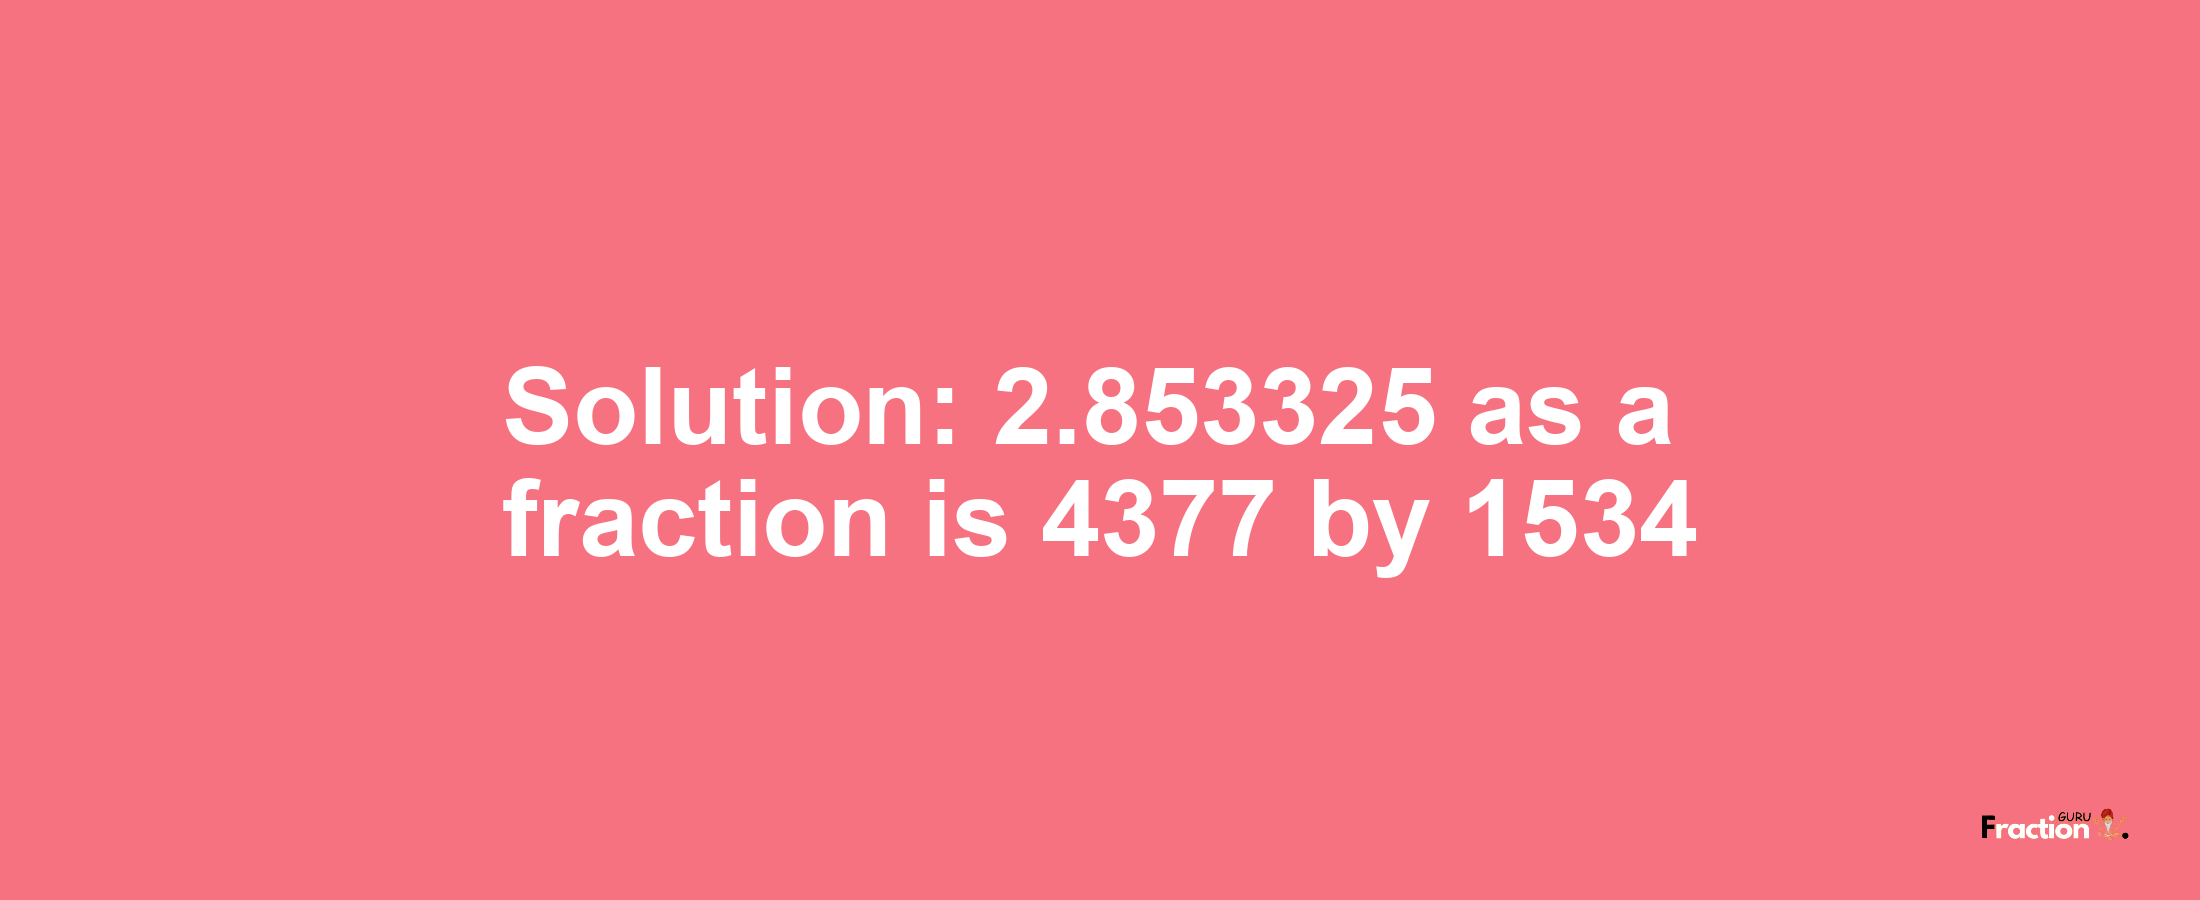 Solution:2.853325 as a fraction is 4377/1534